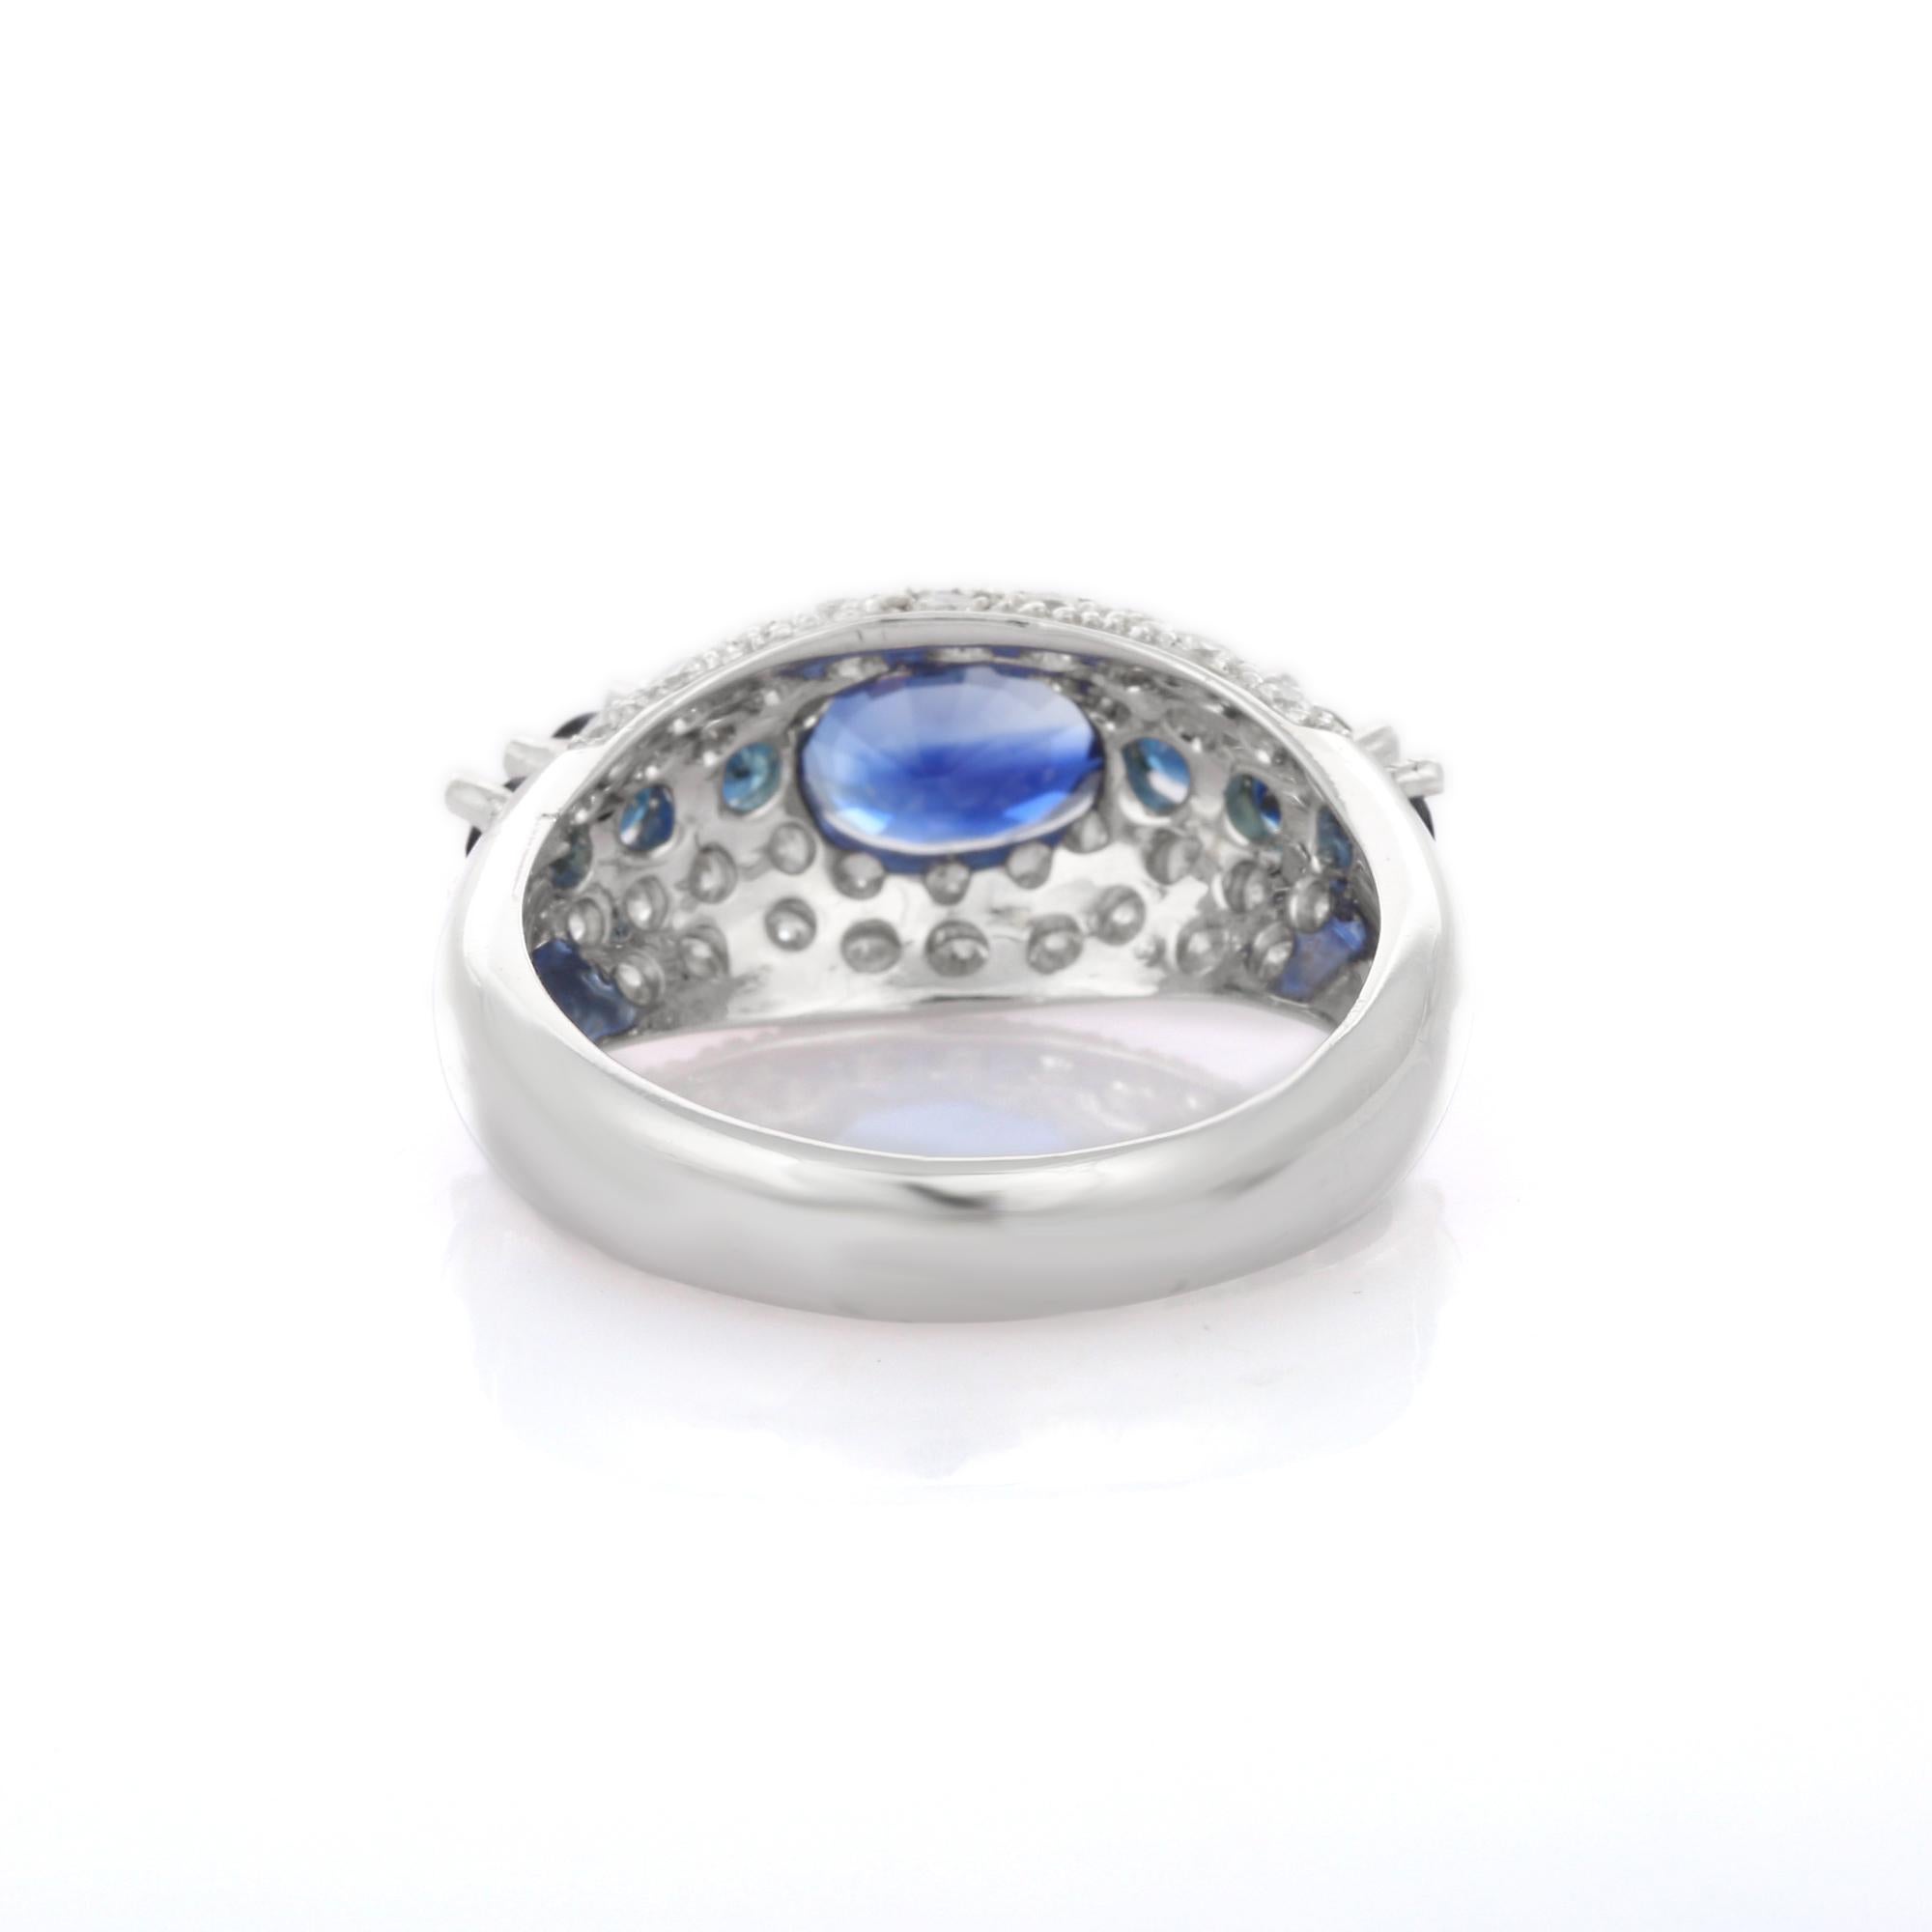 For Sale:  Blue Sapphire Engagement Ring with Diamonds in 18K White Gold 5